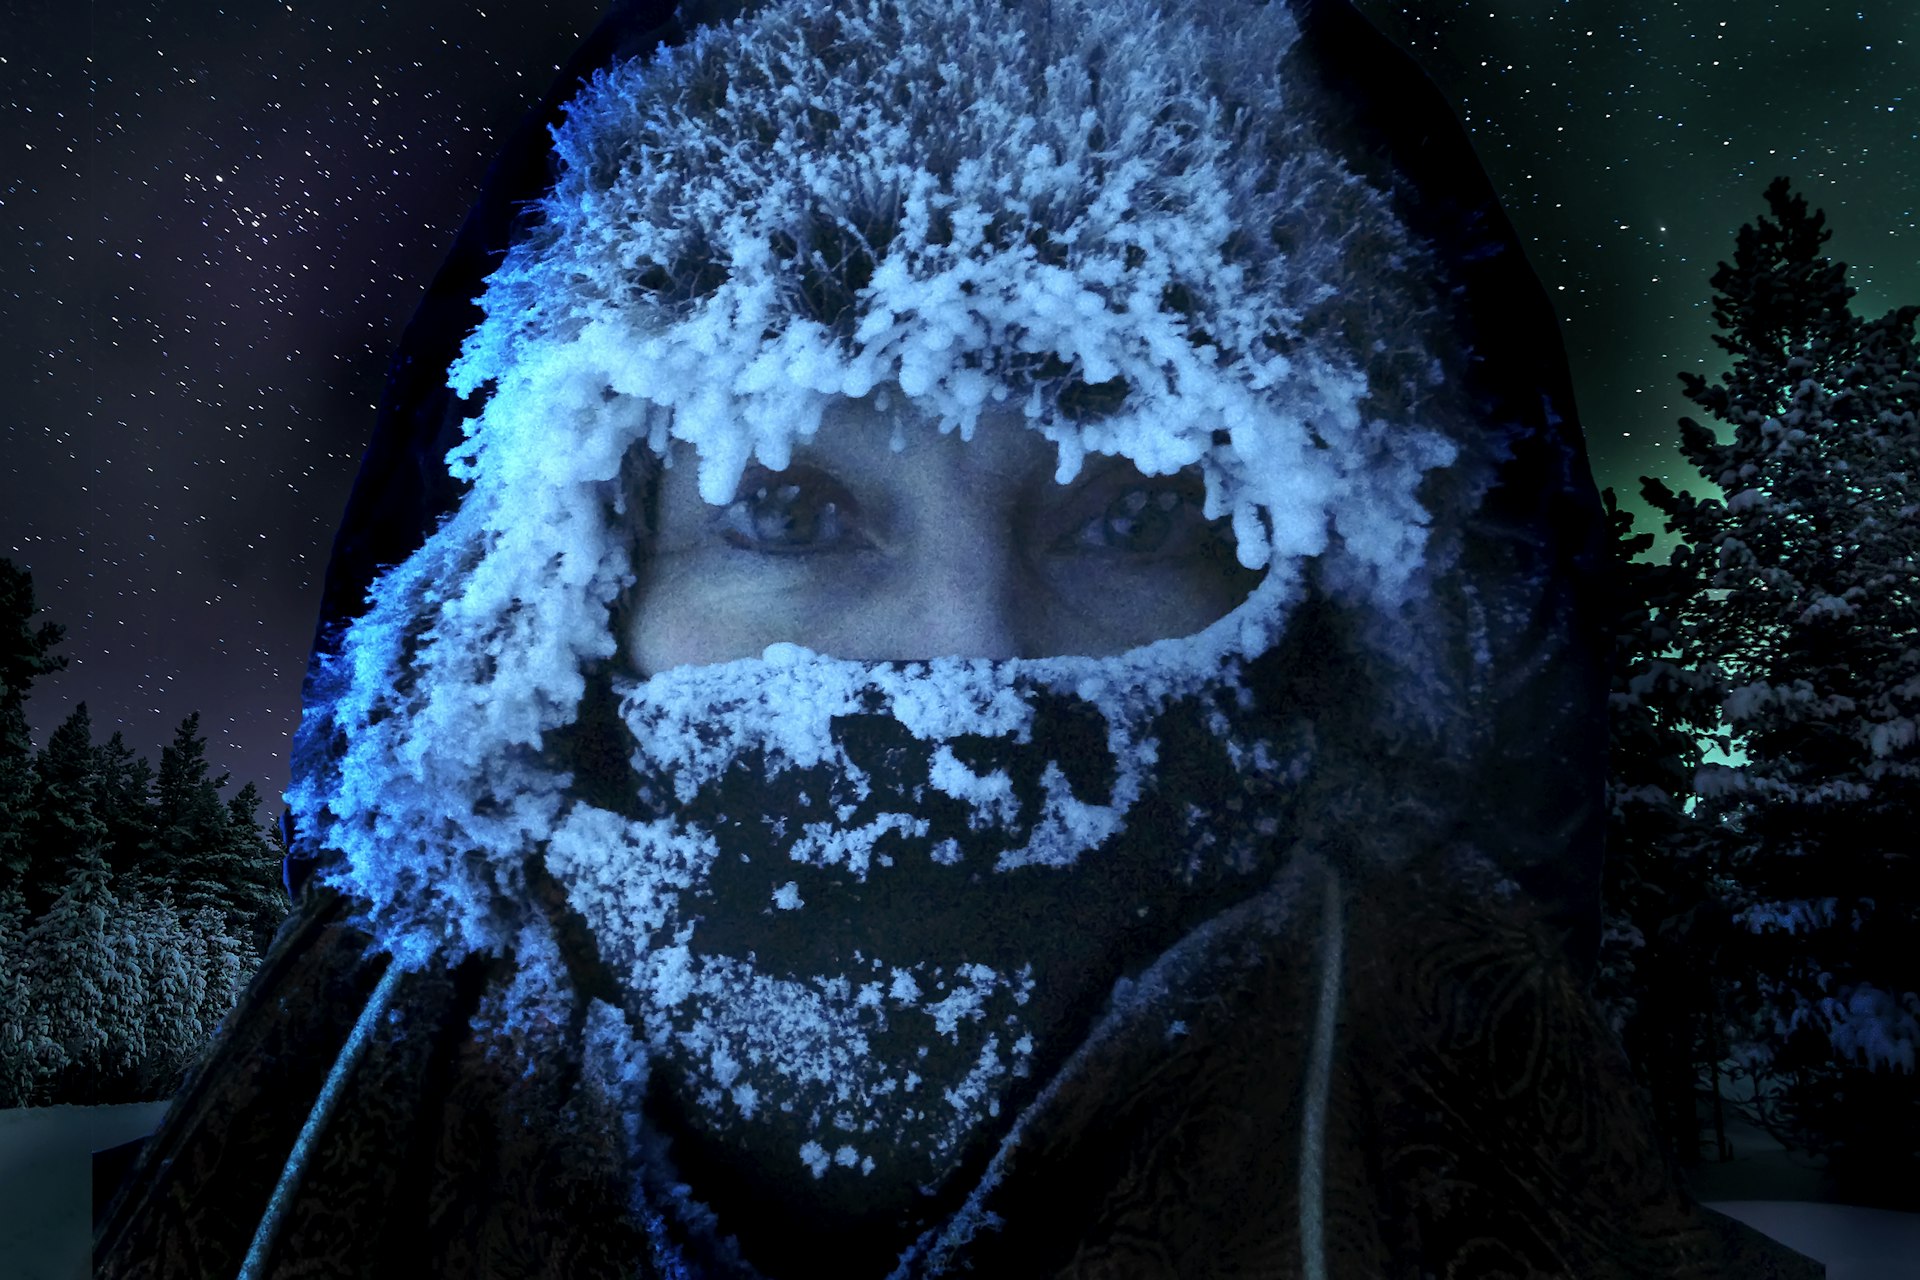 Close-up of a person's face covered with frost and ice on their hood and scarf, with the Northern Lights visible in the night sky behind them and trees faintly visible in the darkness